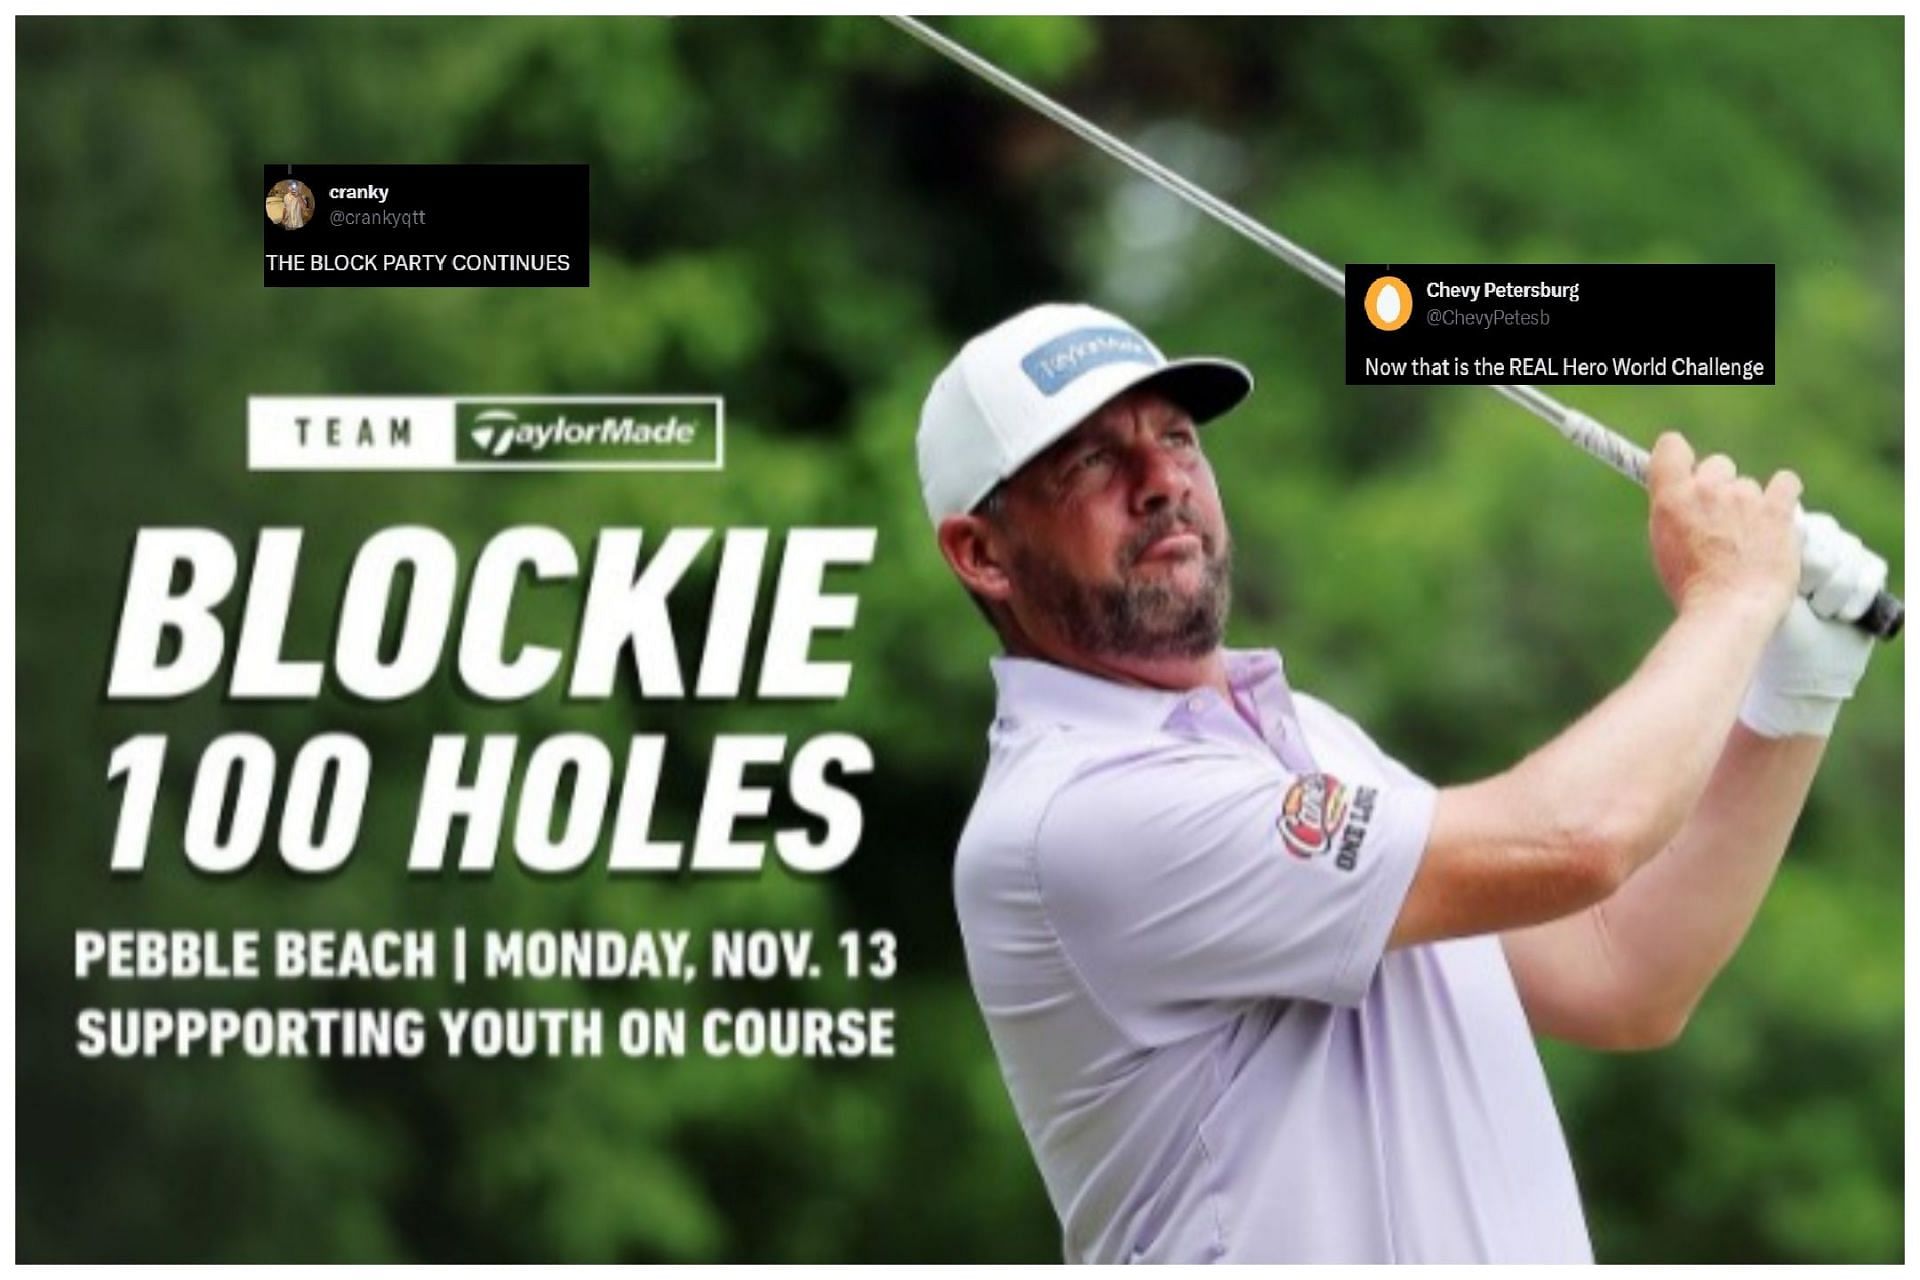 Michael Block will participate at 100-Hole hike event for Youth on Course charity (Image via Instagram.com/blockiegolf)